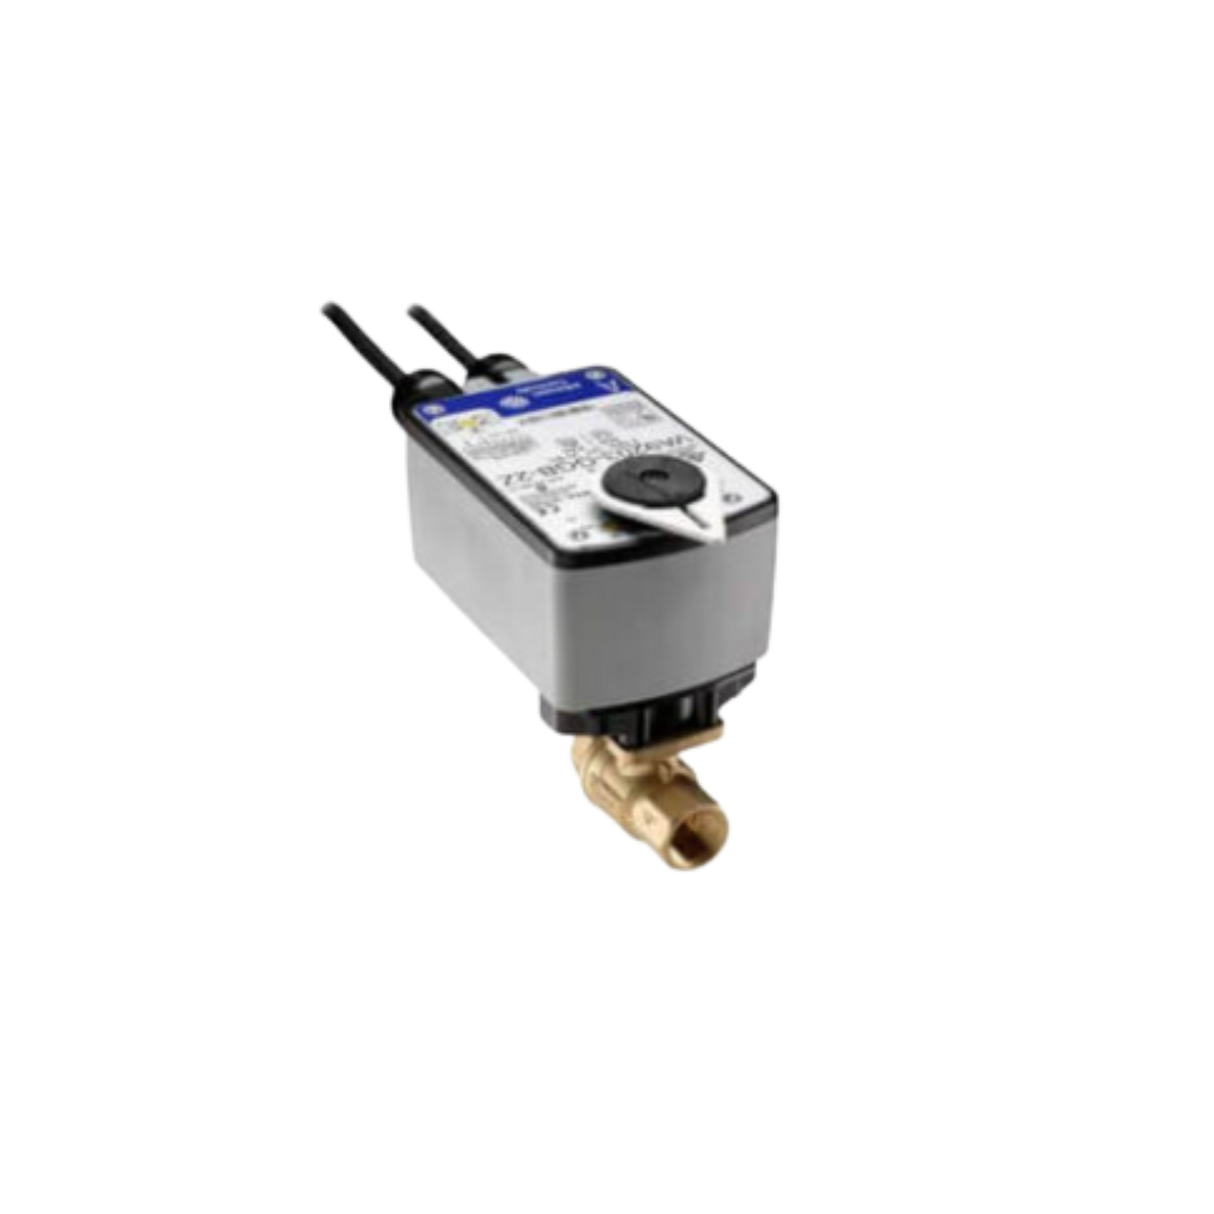 Johnson Controls VG1245AD+943GGA 24VAC, 24VDC, 1/2" NPT Connection Size, 2 Way, Equal Percentage Flow, Actuated, Ball Valve